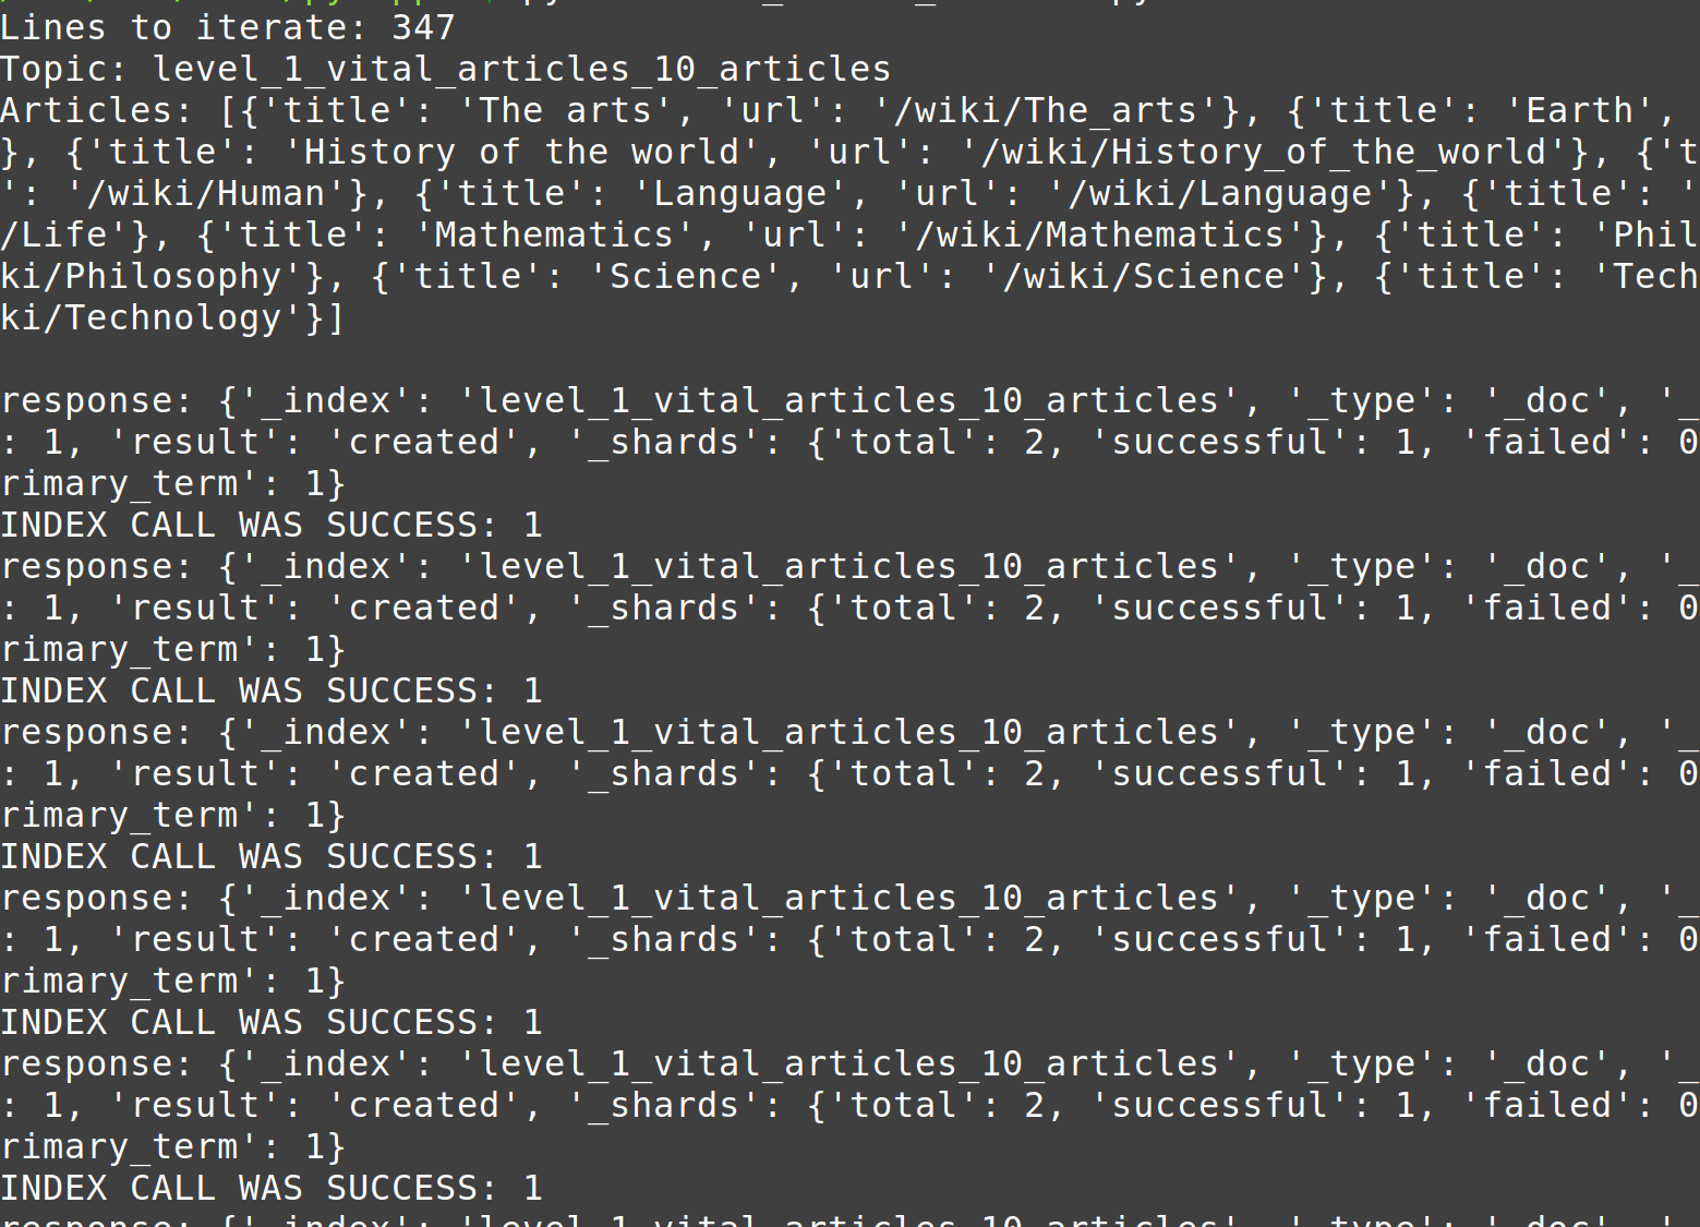 Wikipedia titles and URLs indexed to Elasticsearch as documents in a terminal window